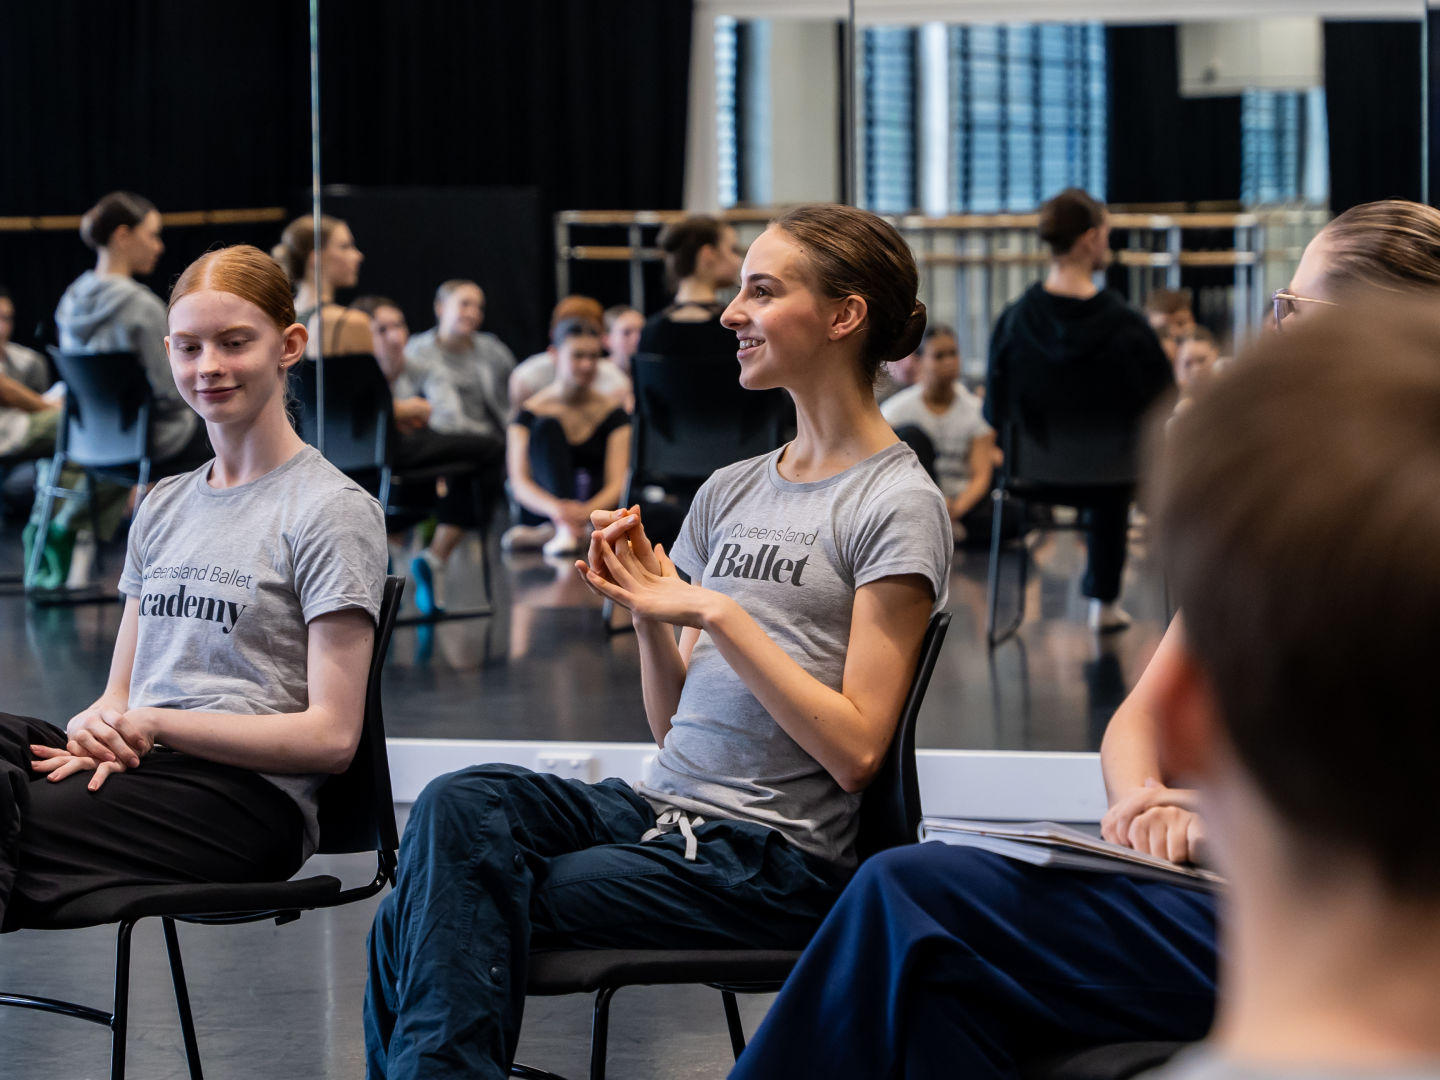 Academy dancers share their Prix de Lausanne and International Exchange stories